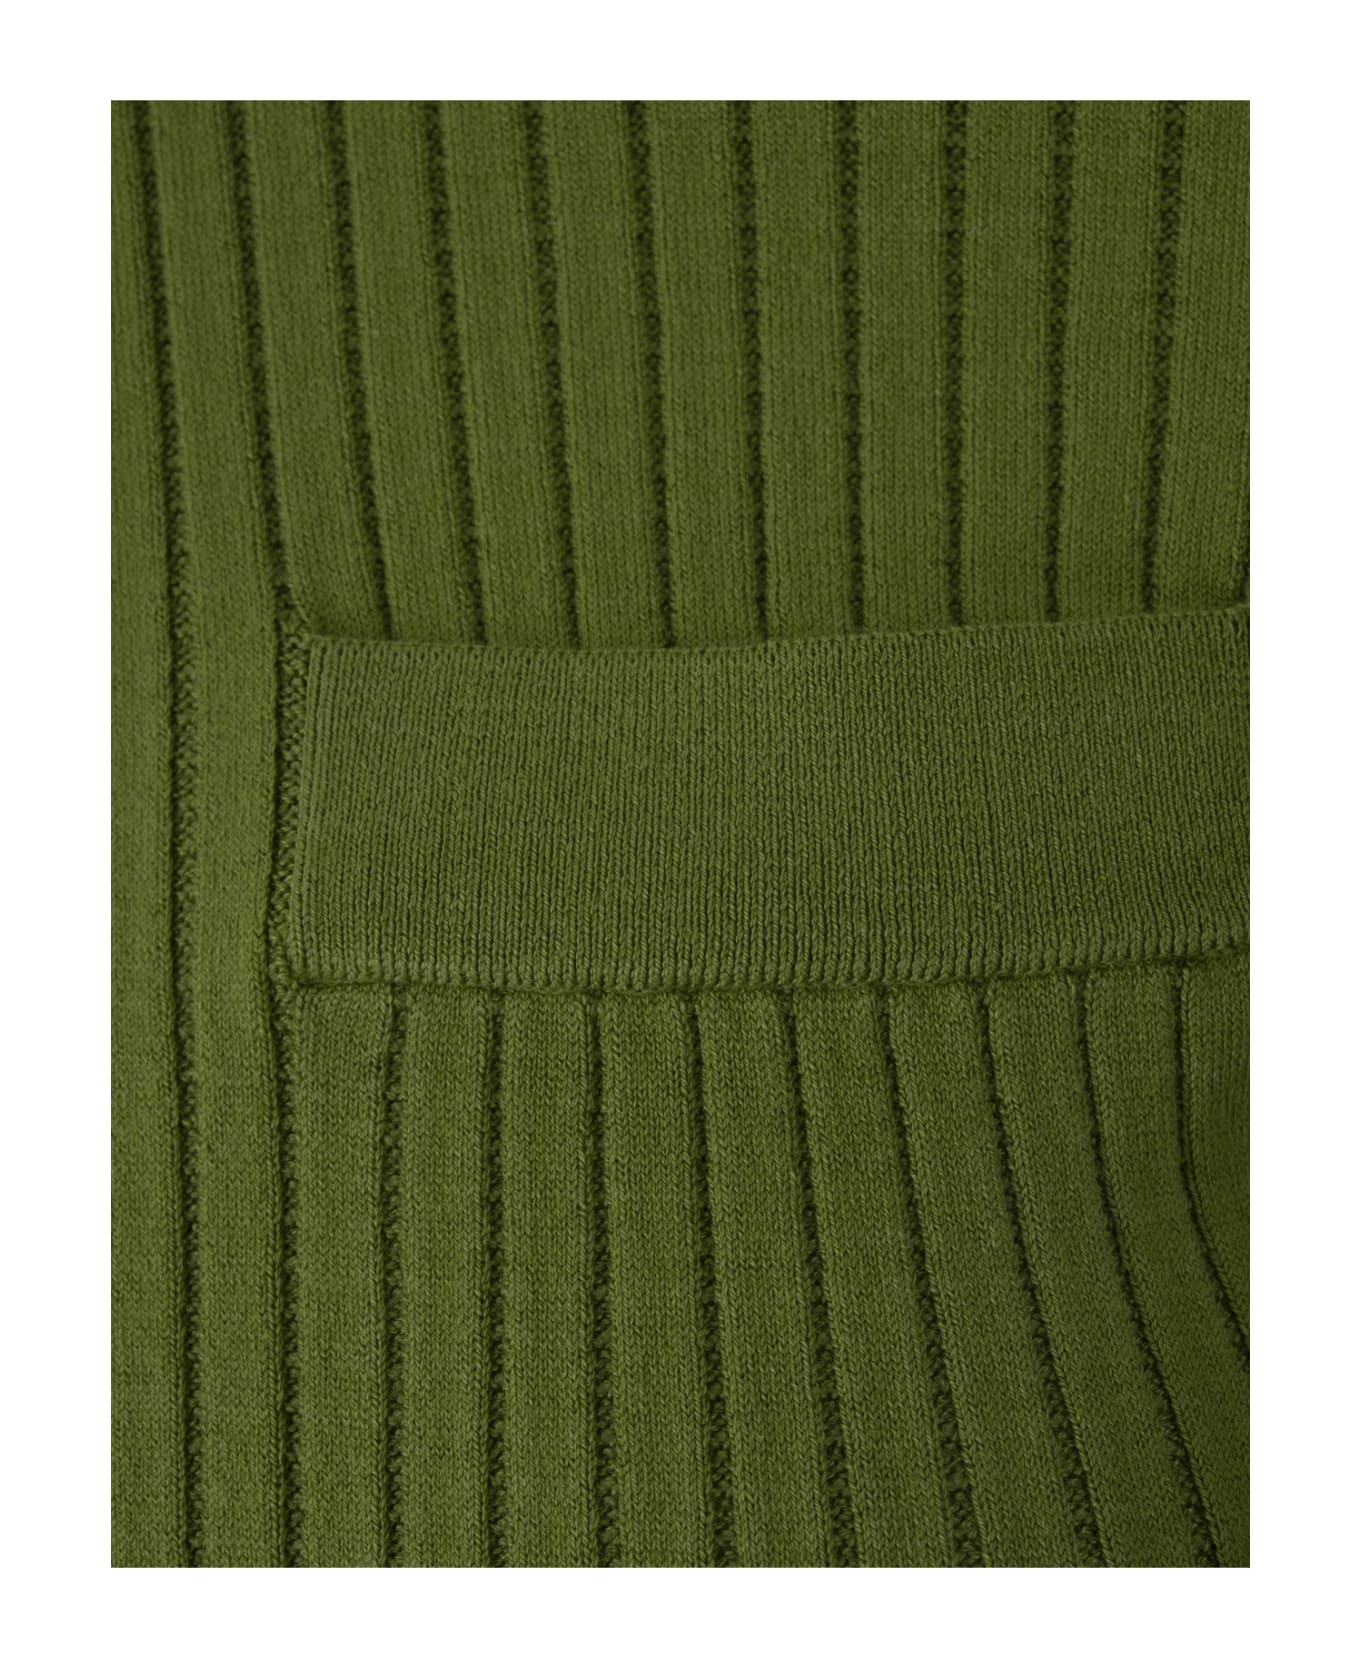 Paco Rabanne Green Ribbed Cotton Crew-neck Sweater - Green